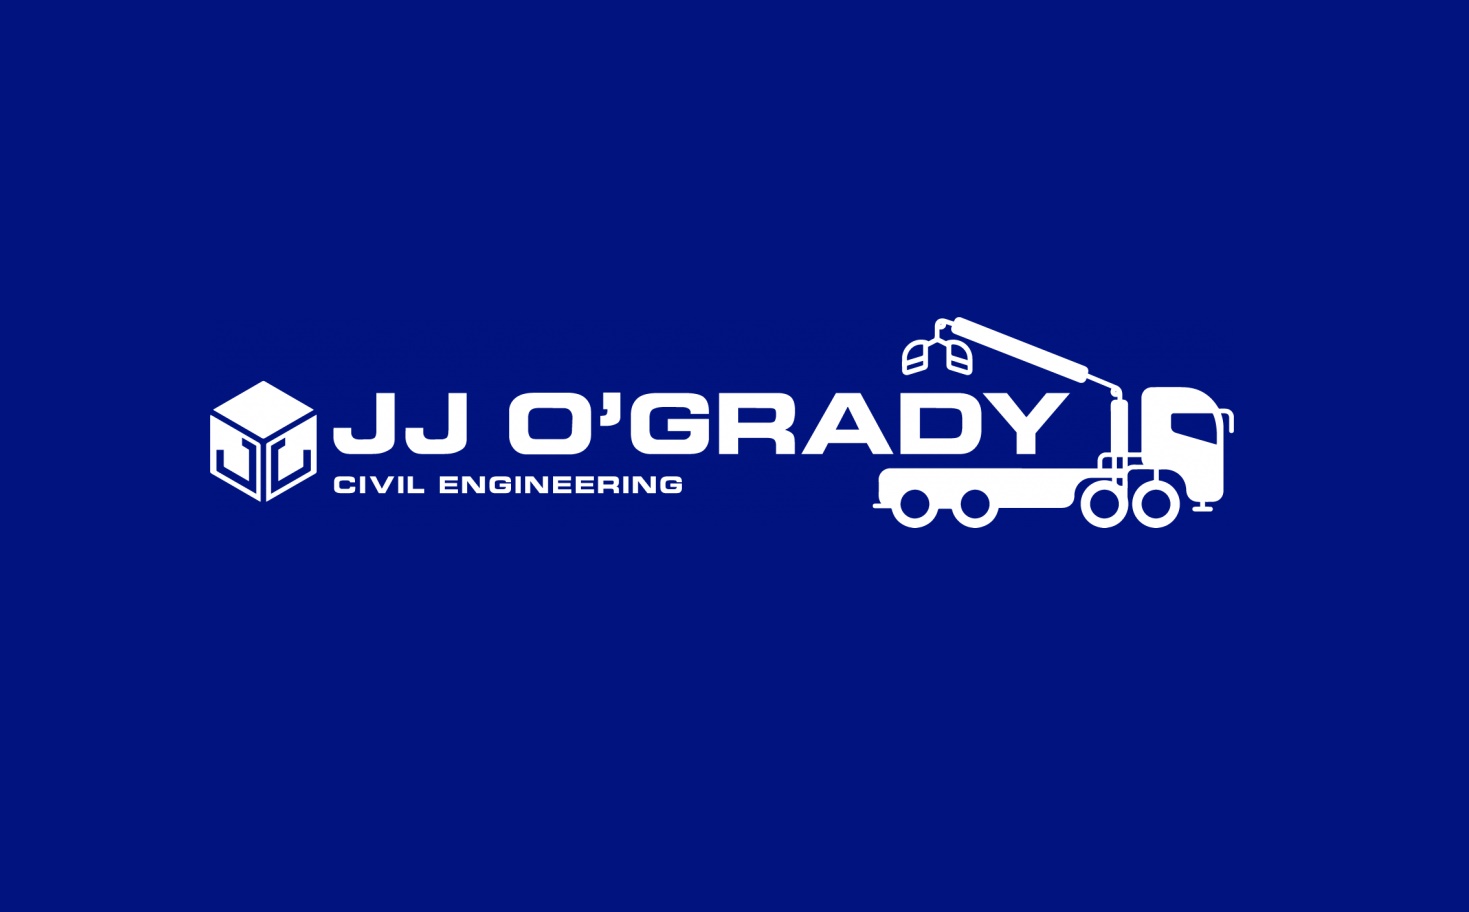 North West’s Fox Brothers acquires JJ O’Grady